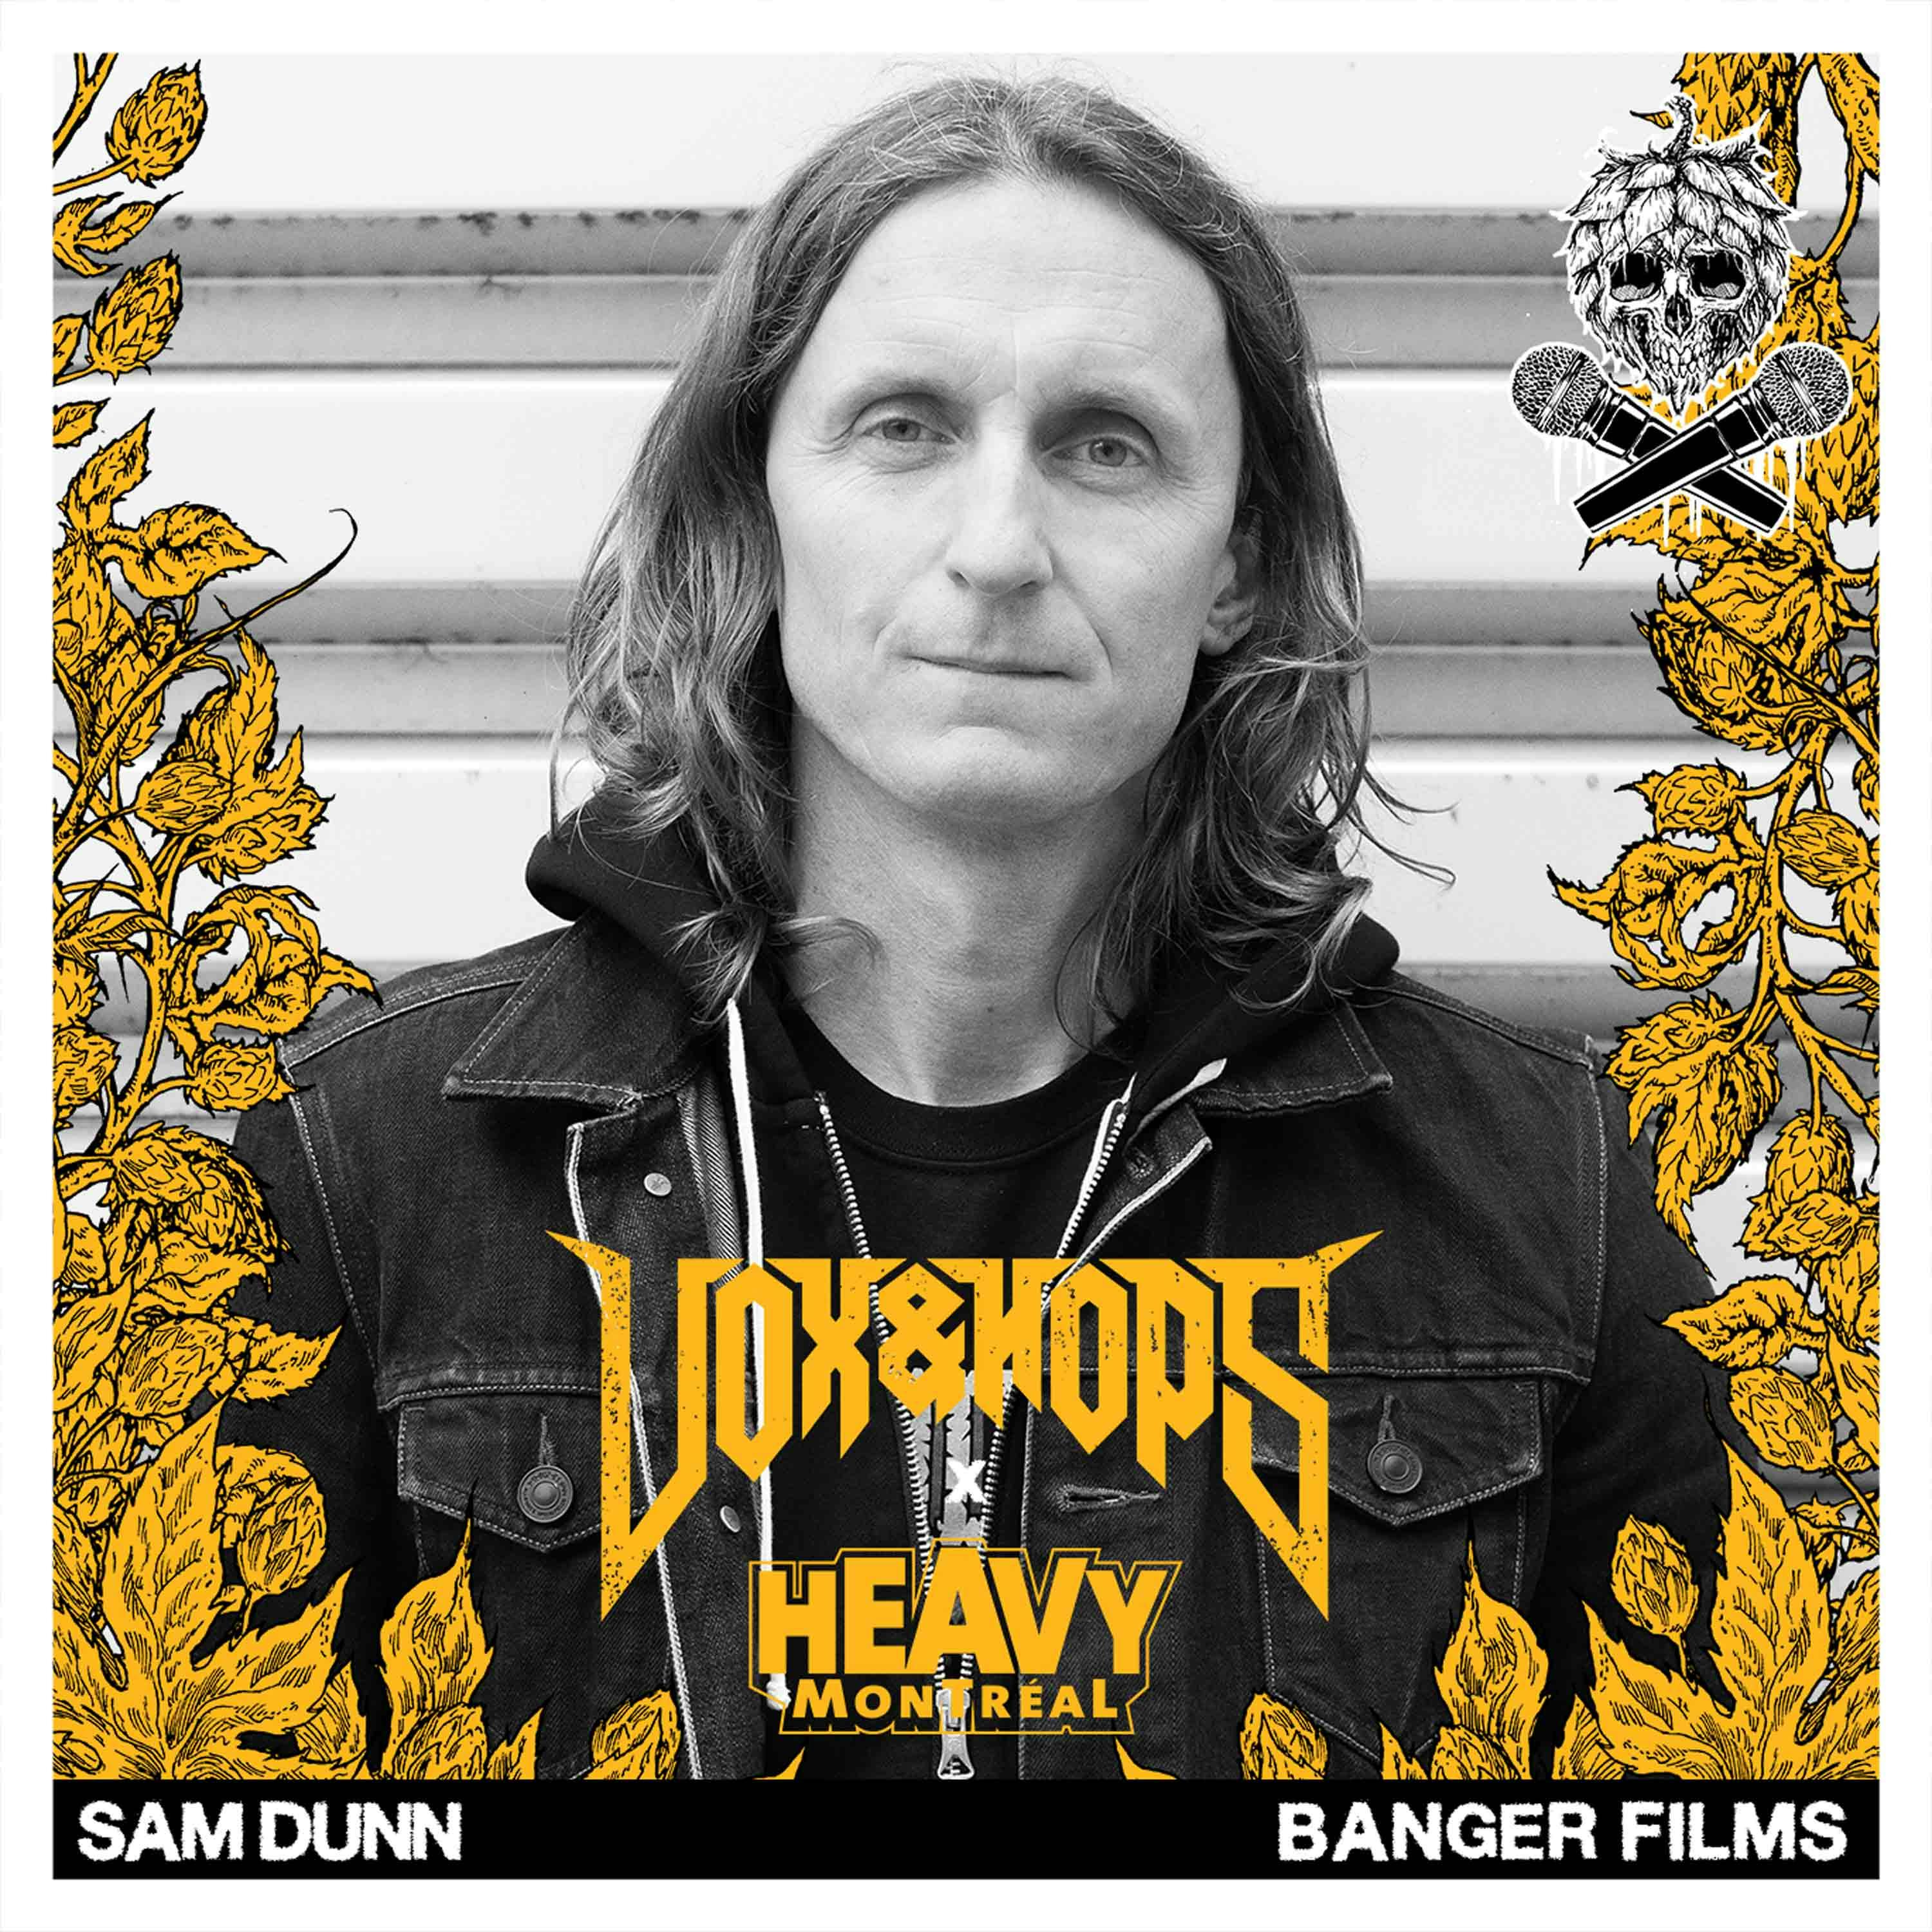 For The Love of Metal with Sam Dunn of Banger Films